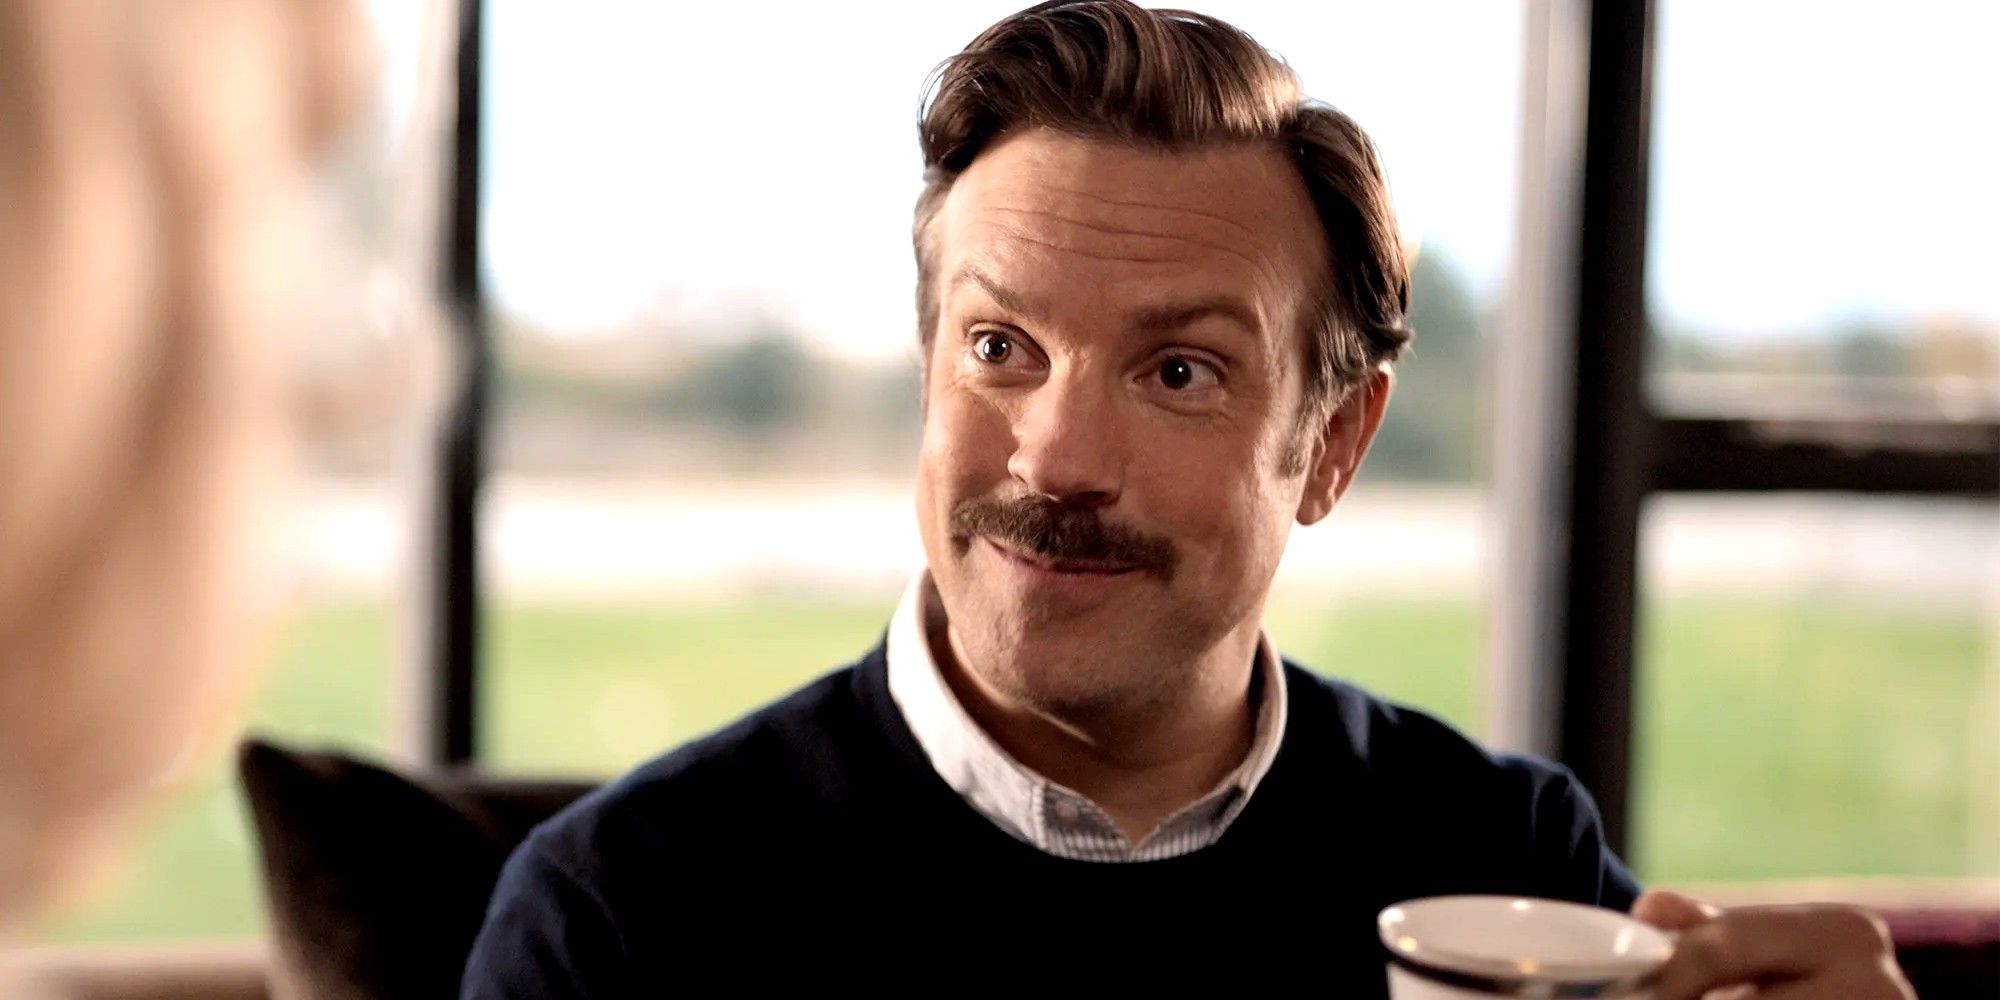 Ted tries tea for the first time on Ted Lasso